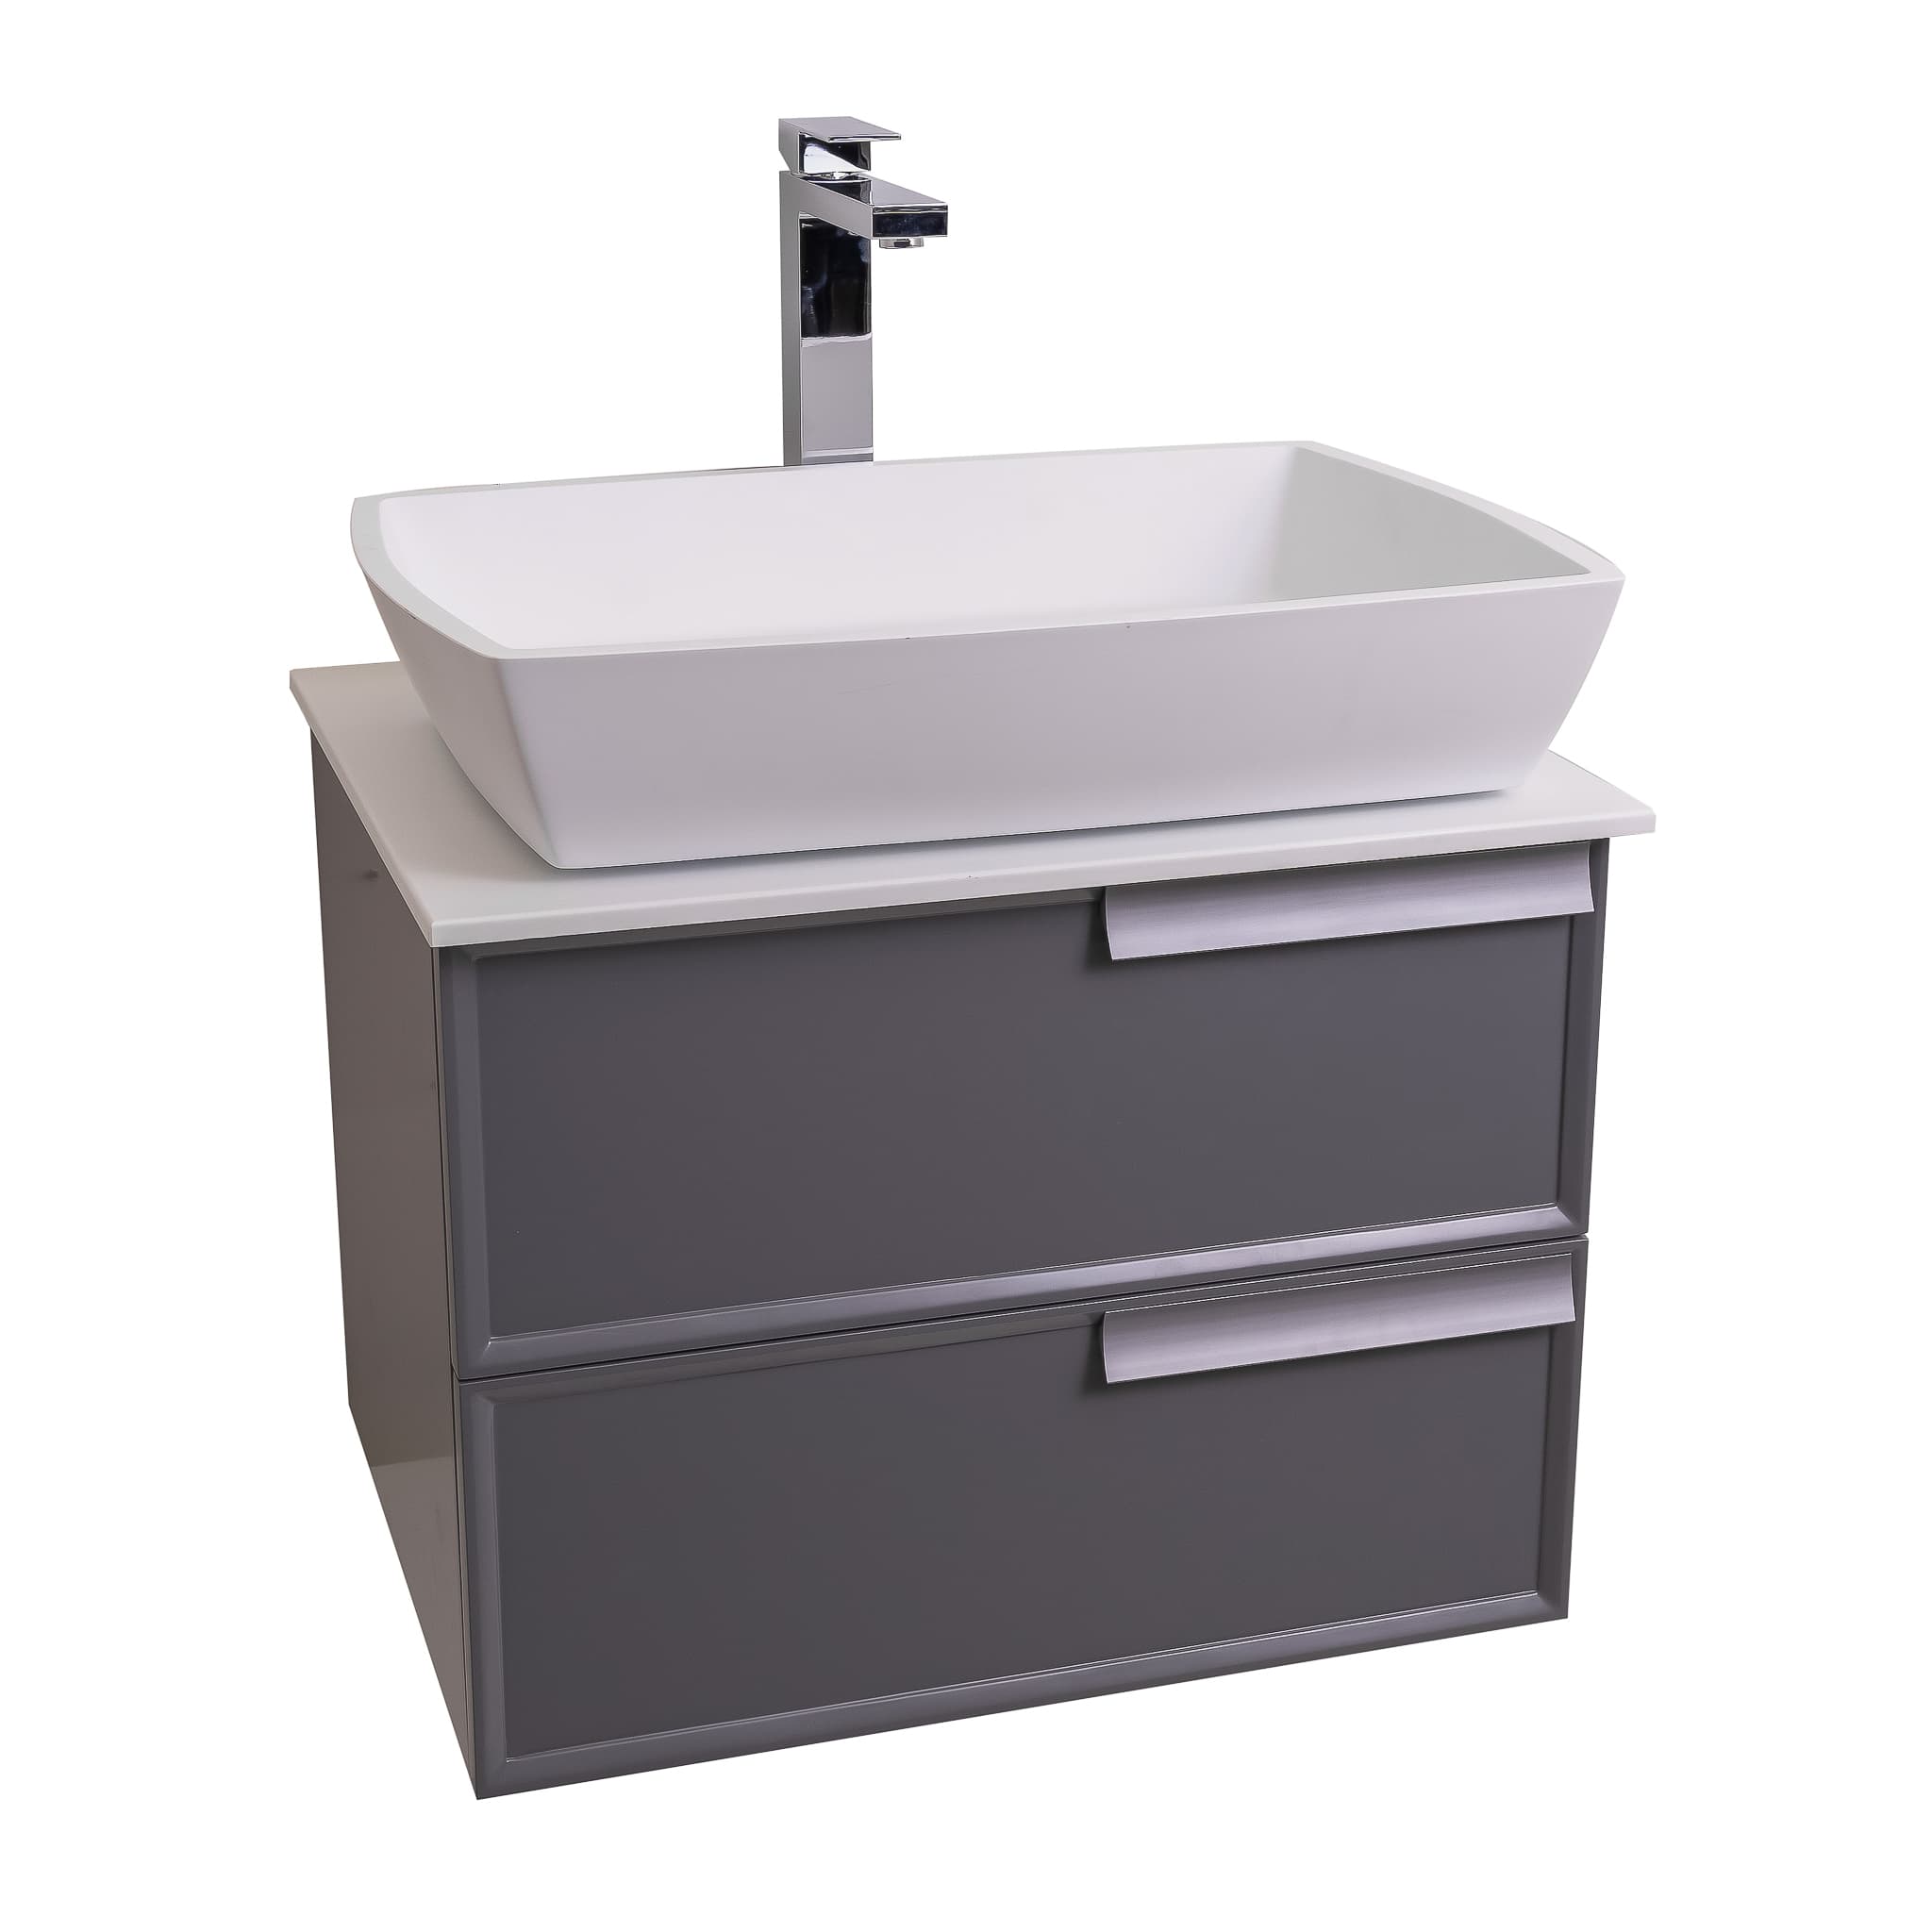 Garda 23.5 Matte Grey Cabinet, Solid Surface Flat White Counter and Square Solid Surface White Basin 1316, Wall Mounted Modern Vanity Set